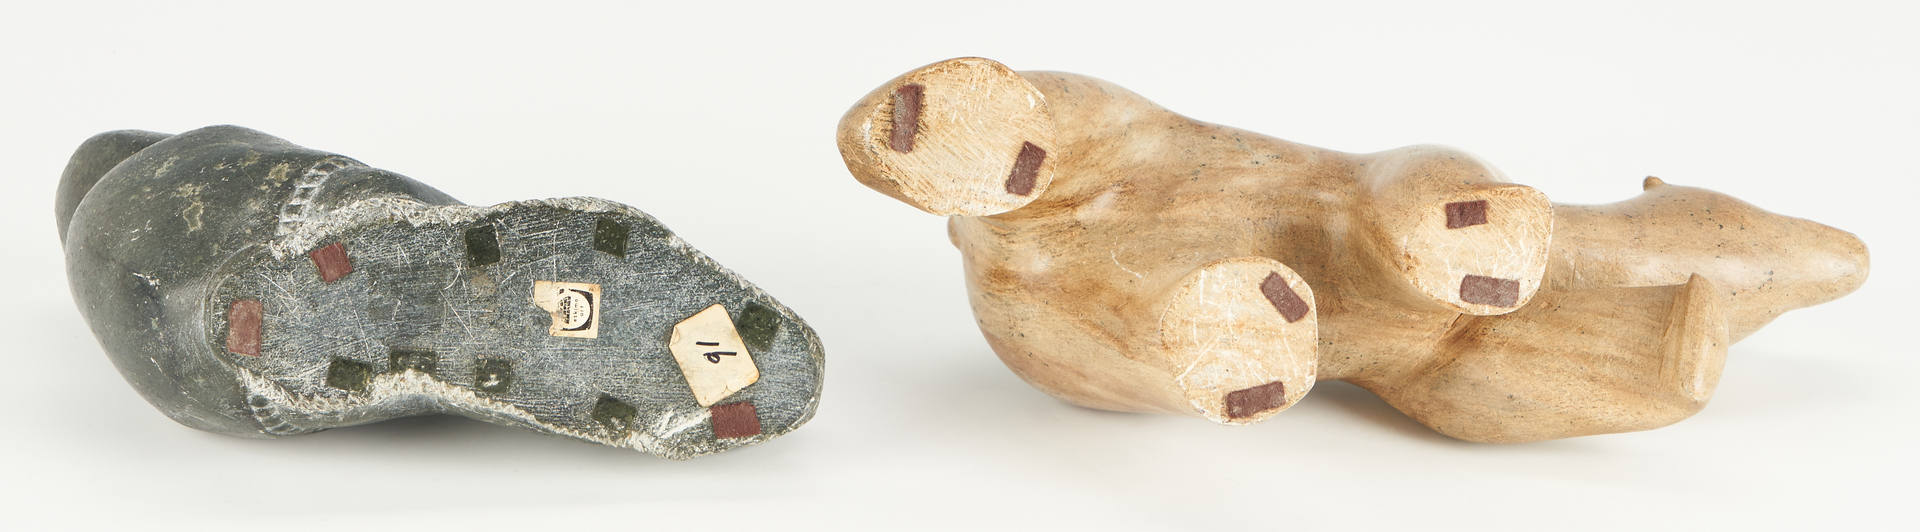 Lot 594: Five (5) Inuit Carved Stone Items, incl. Anamorphic Figure